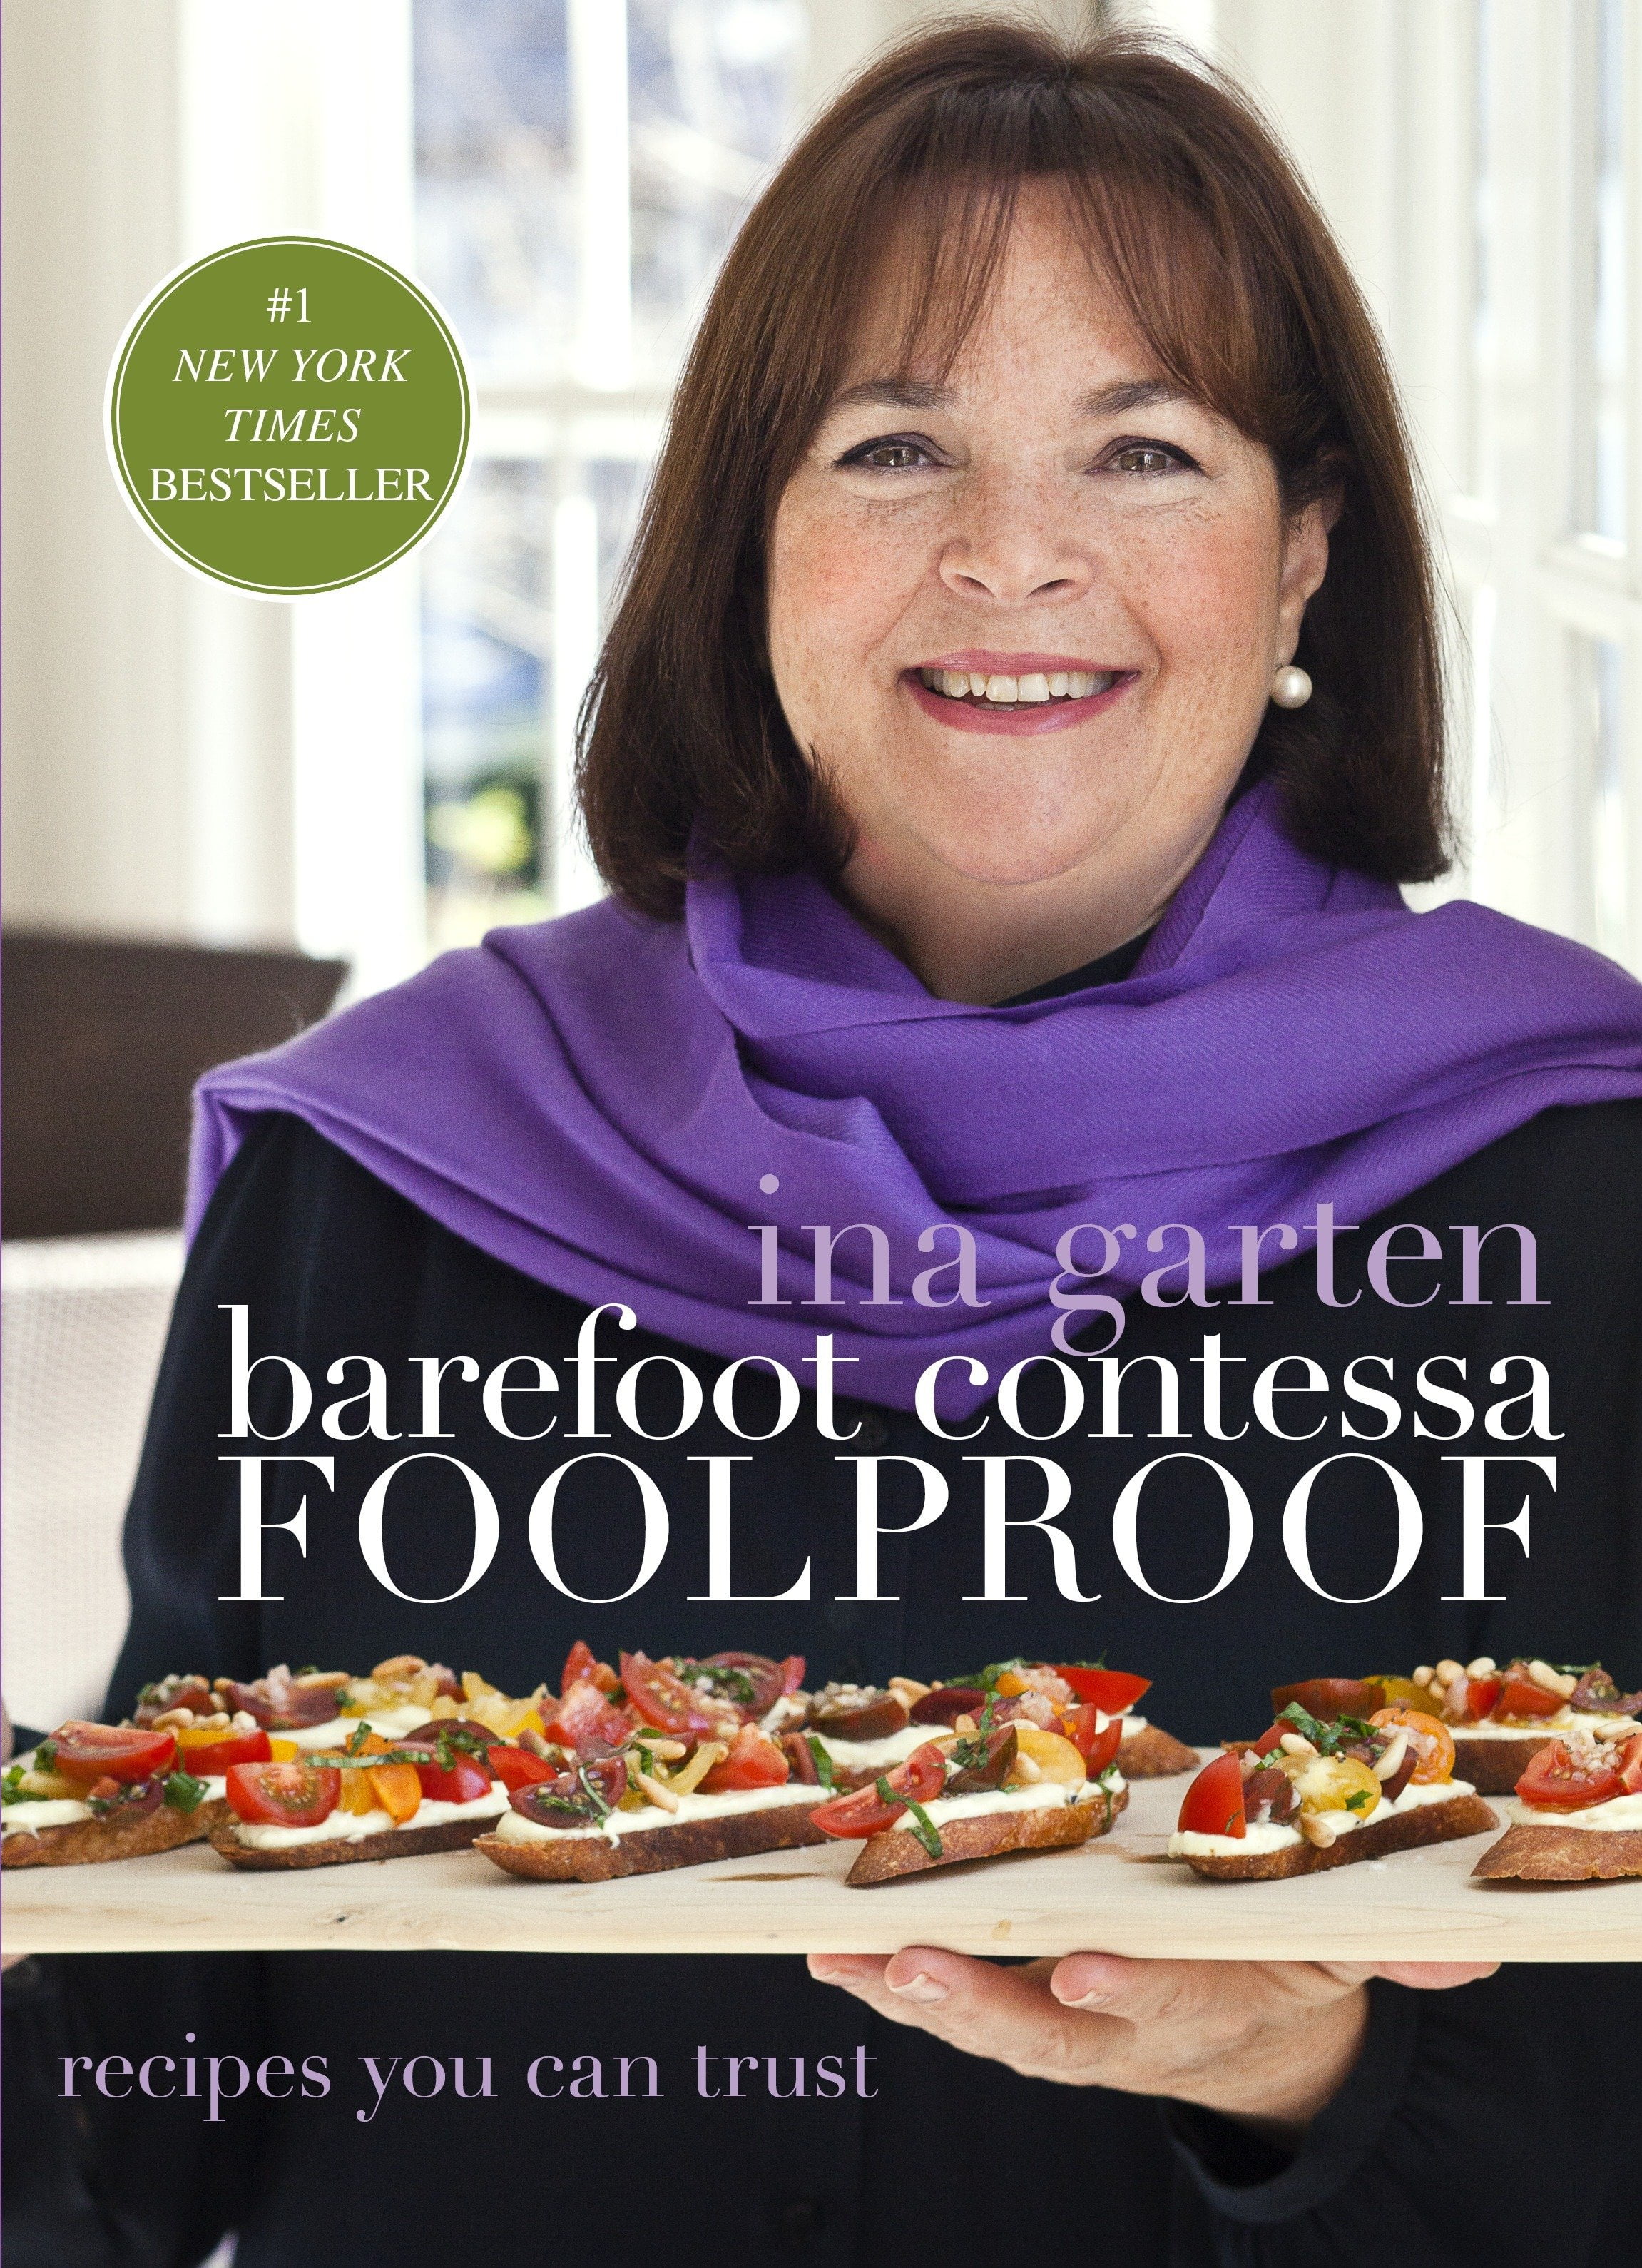 recipes by the barefoot contessa